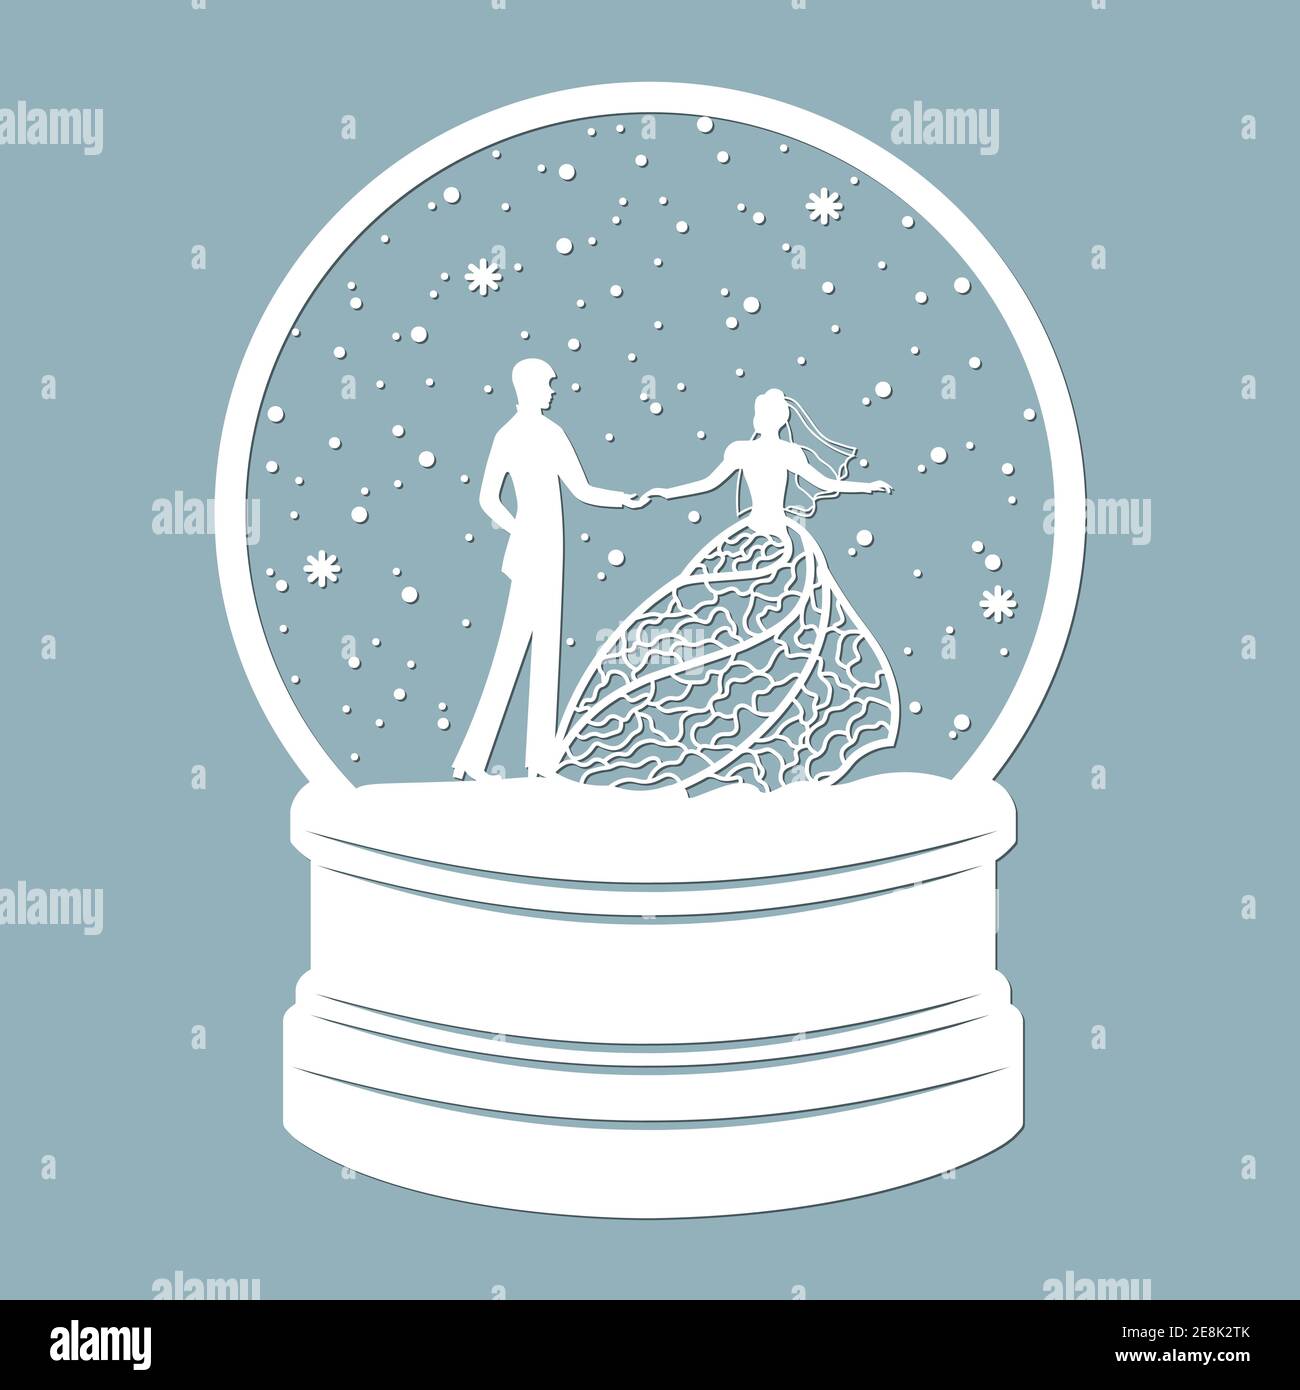 A snow globe, inside a girl and a guy. Laser cutting. Vector illustration. Template for laser cutting, plotter and screen printing. Stock Vector